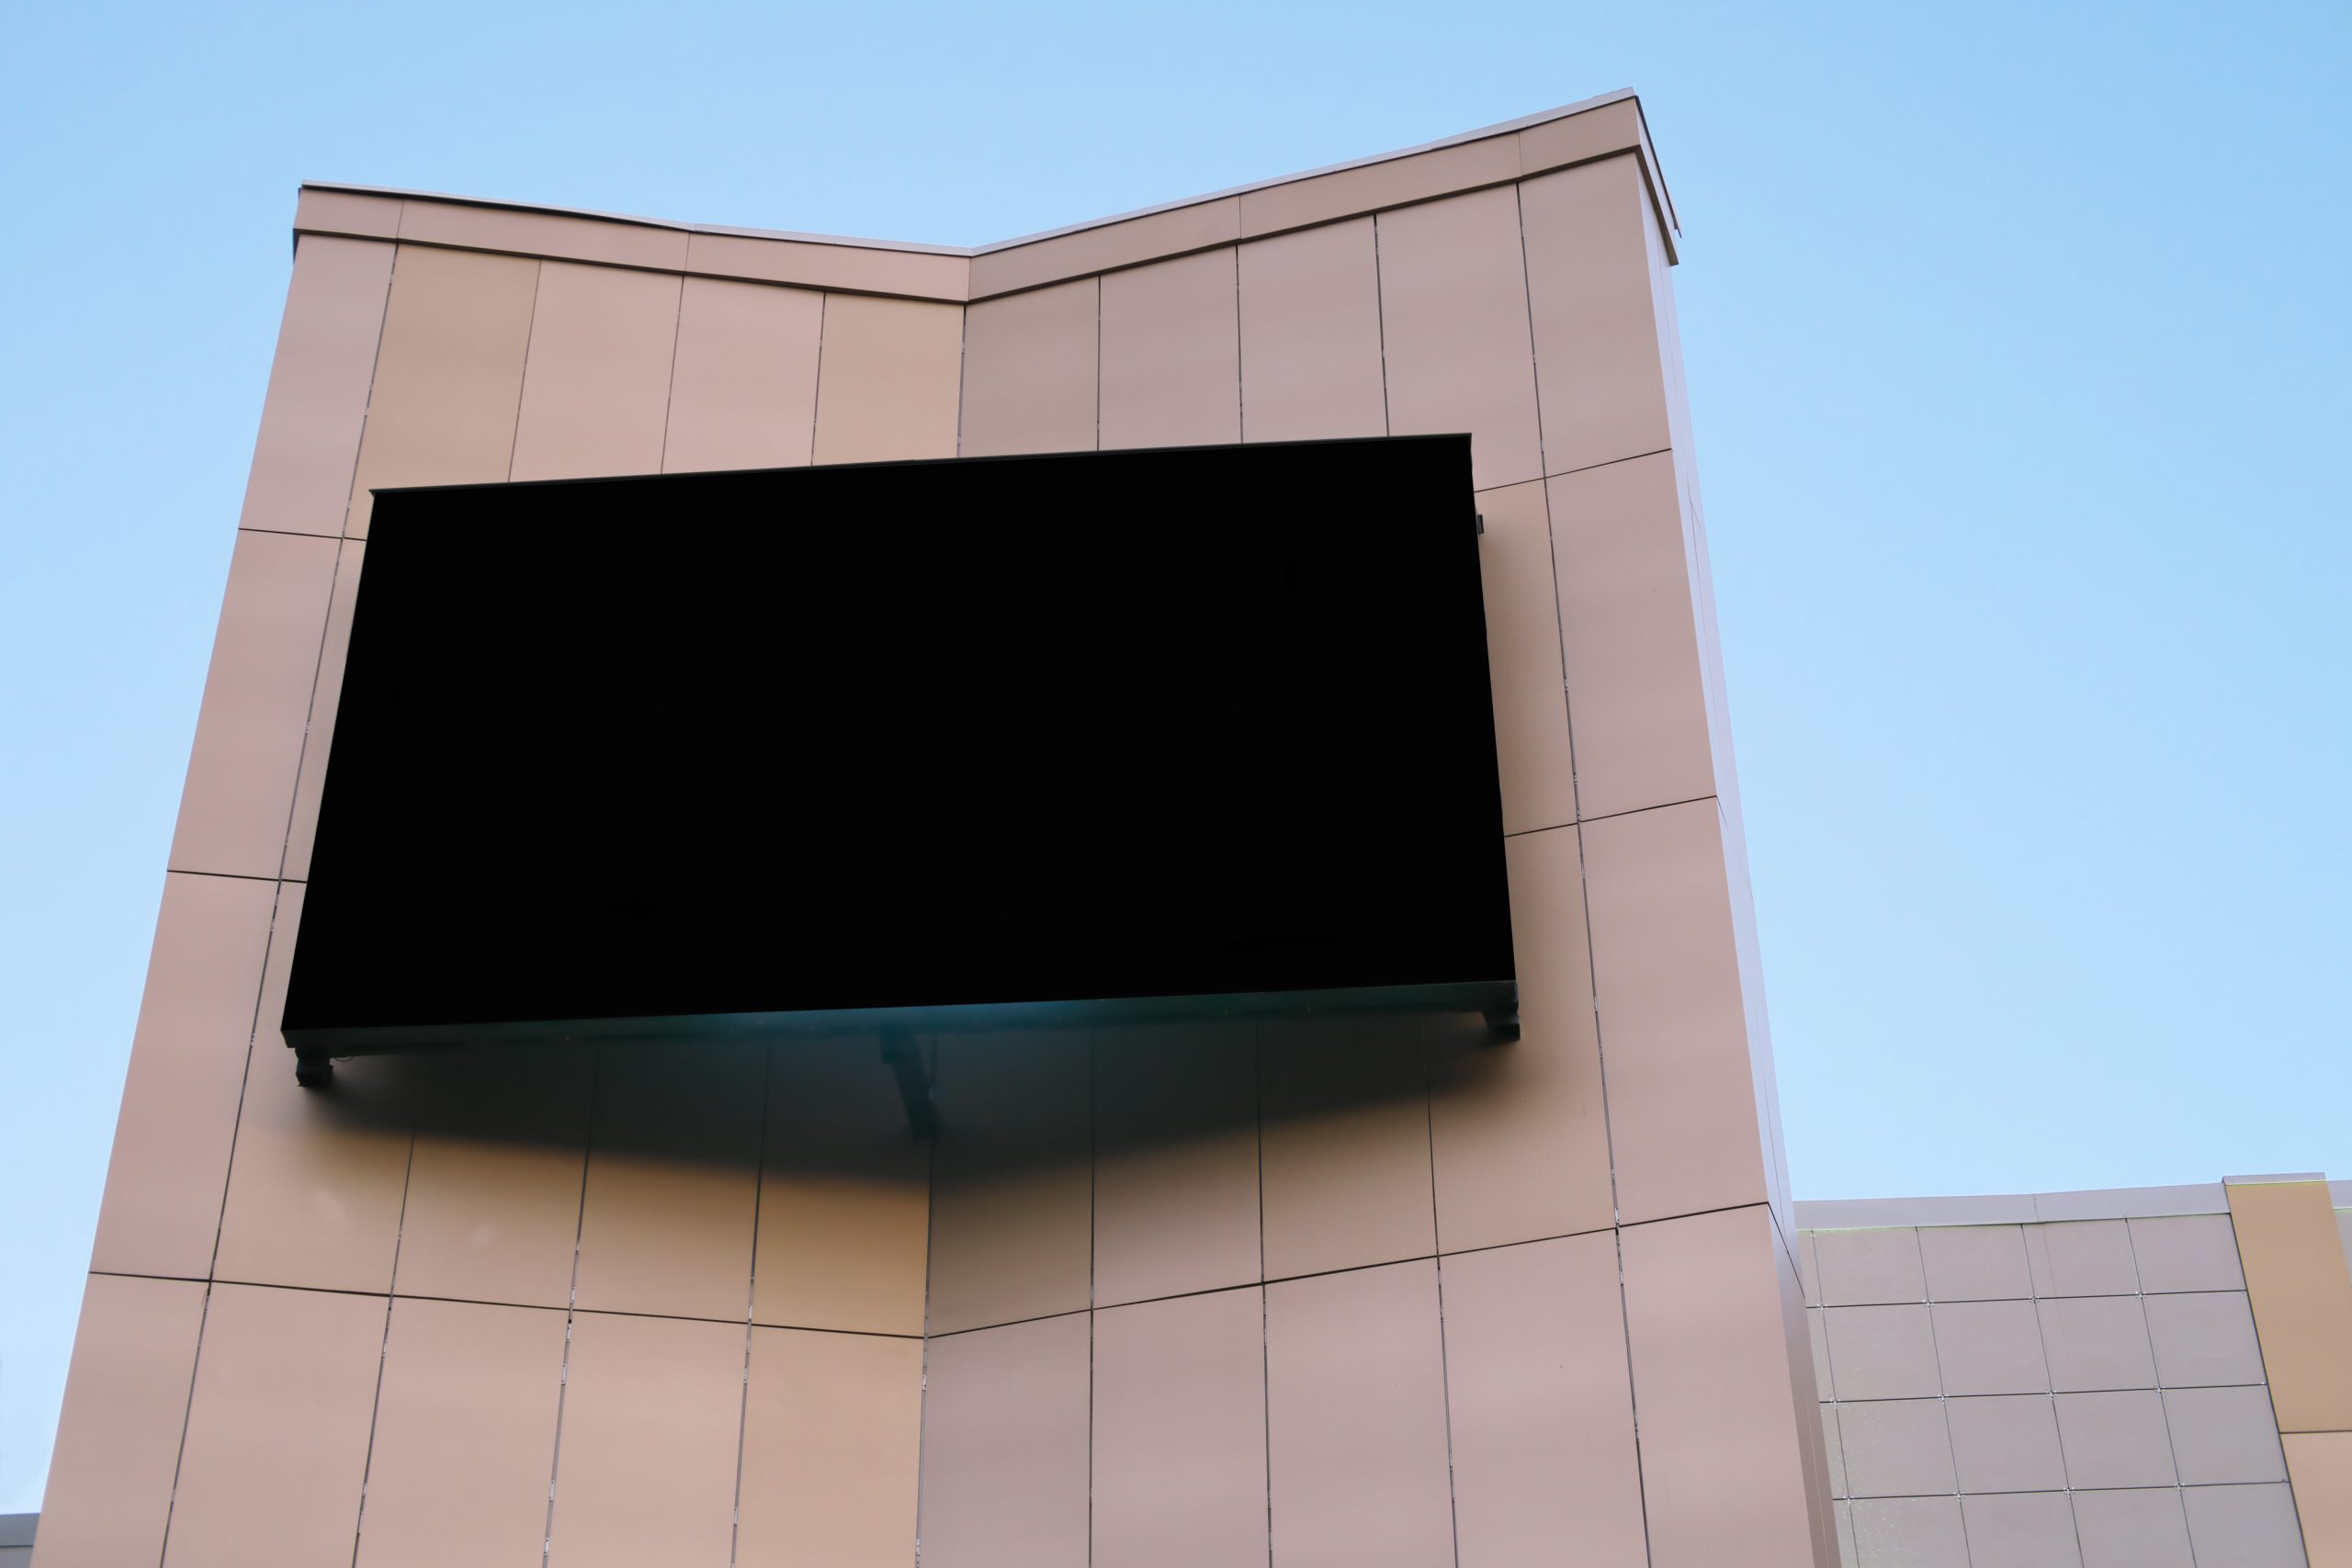 giant outdoor screen for advertising and commercials